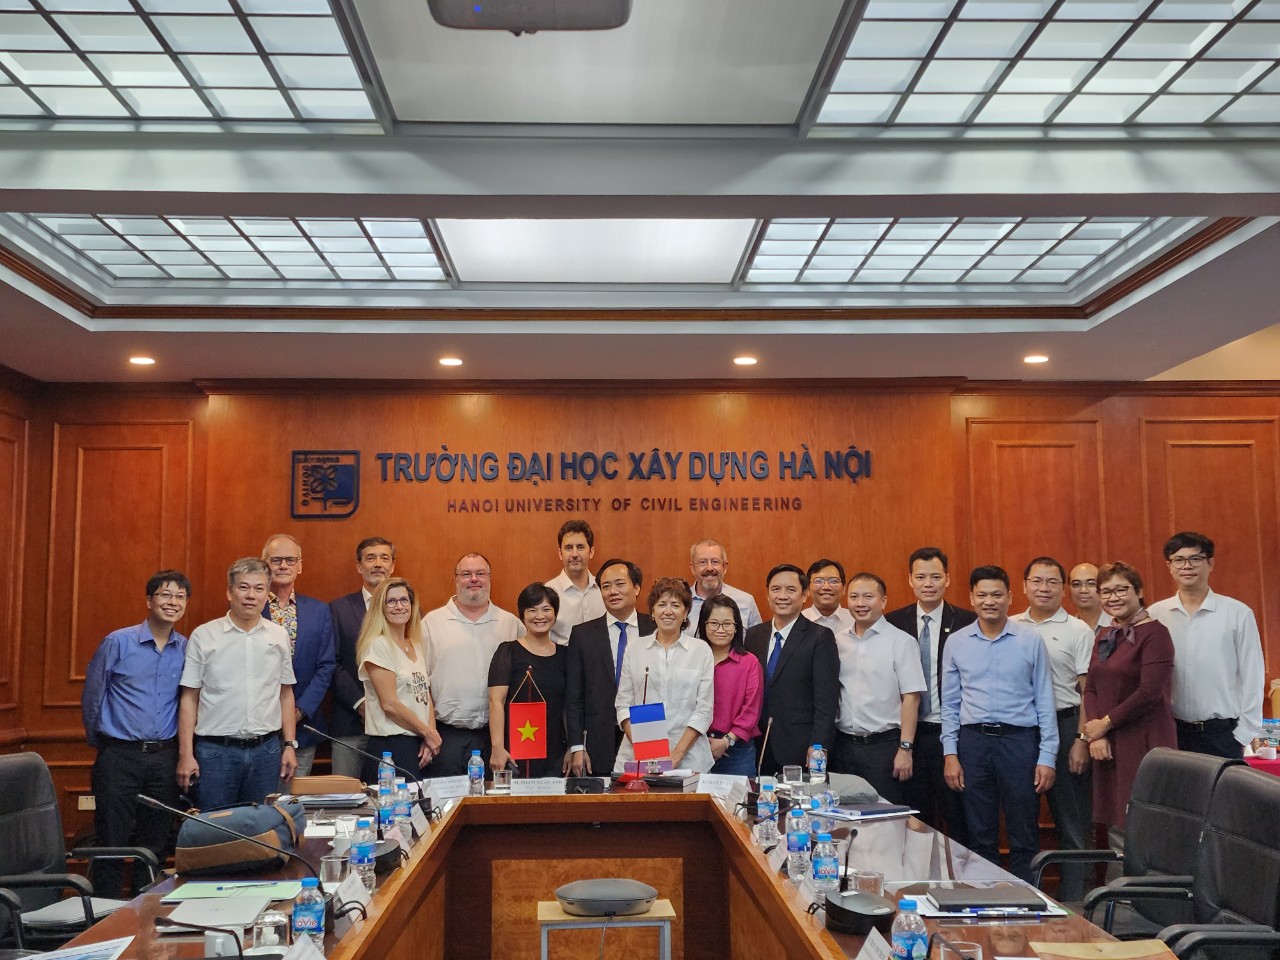 Meeting of The National Council for The Perfection of The High-Quality Engineer Education Program in VietNam - HaNoi University of Civil Engineering in 2022